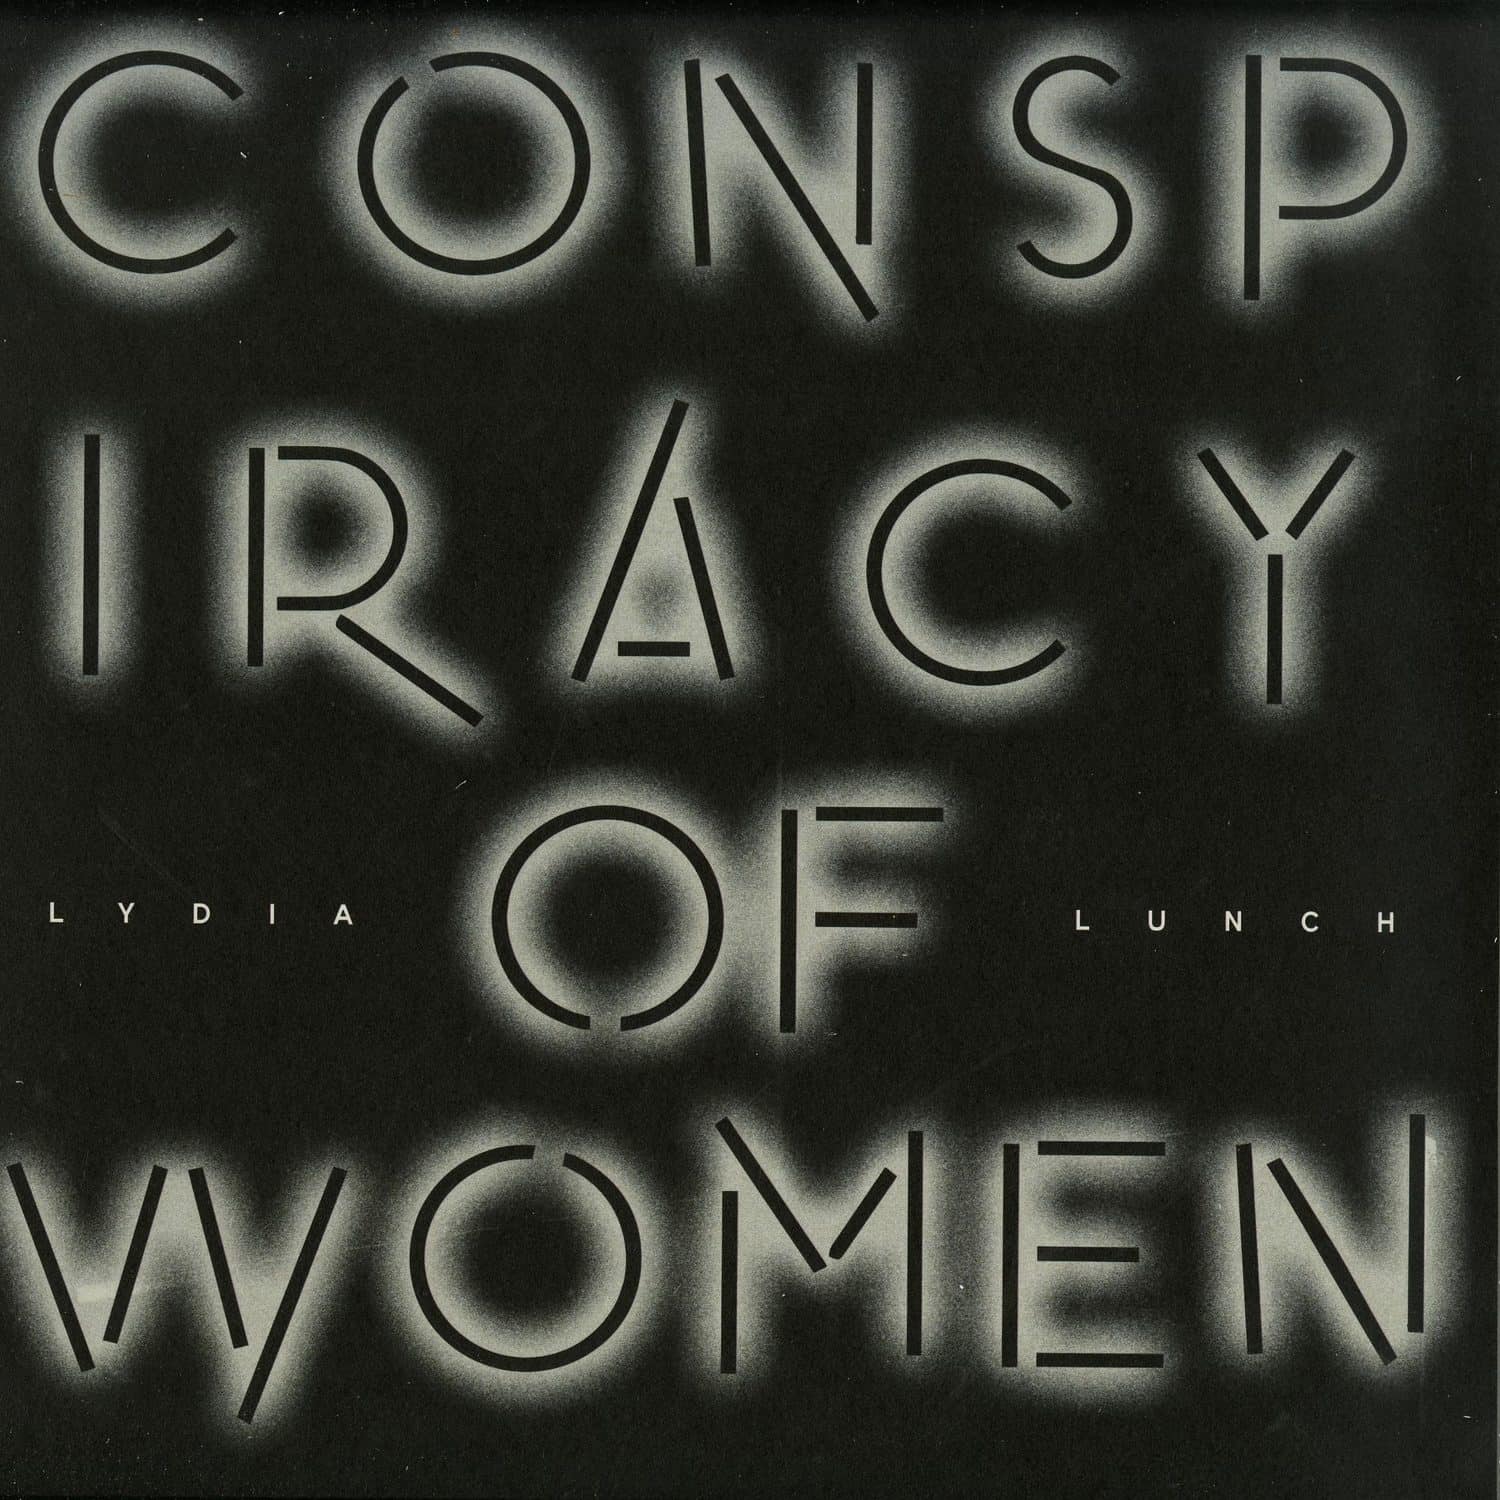 Lydia Lunch - CONSPIRACY OF WOMEN